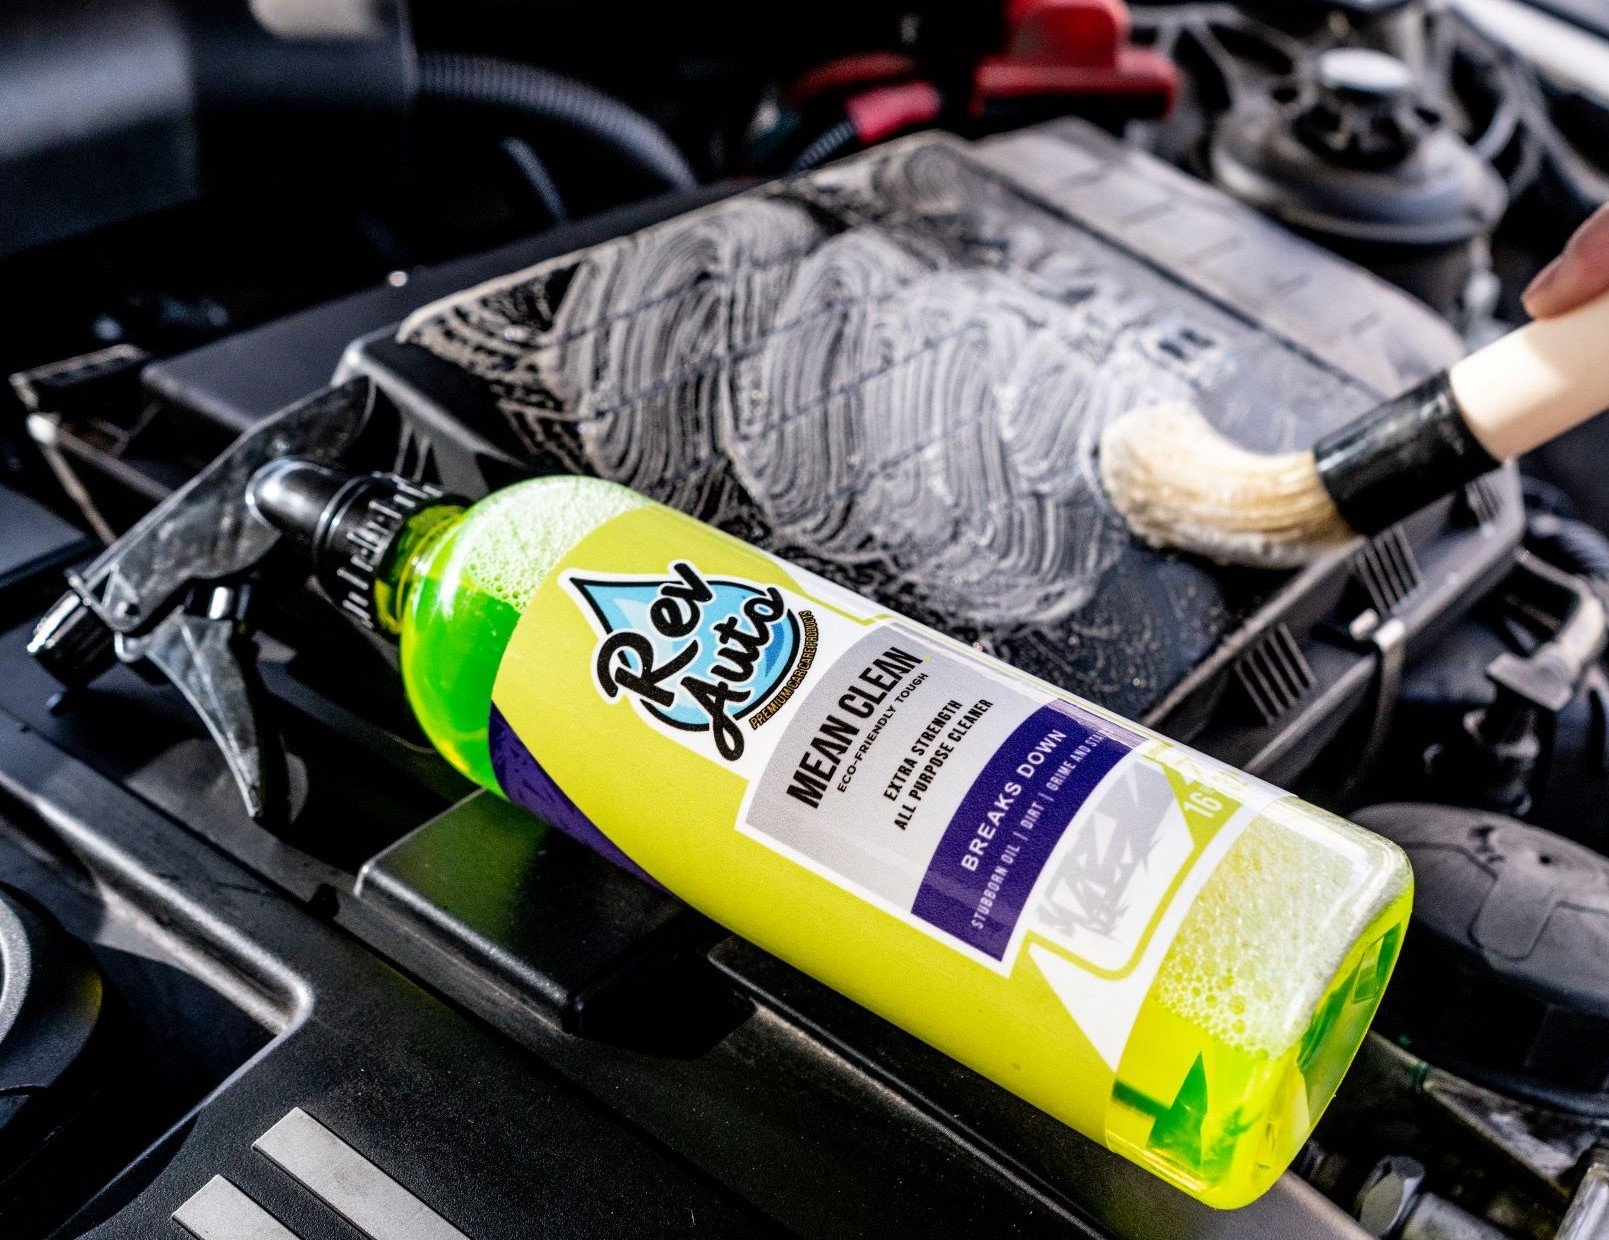 Premium car care products for the enthusiast – REV Auto